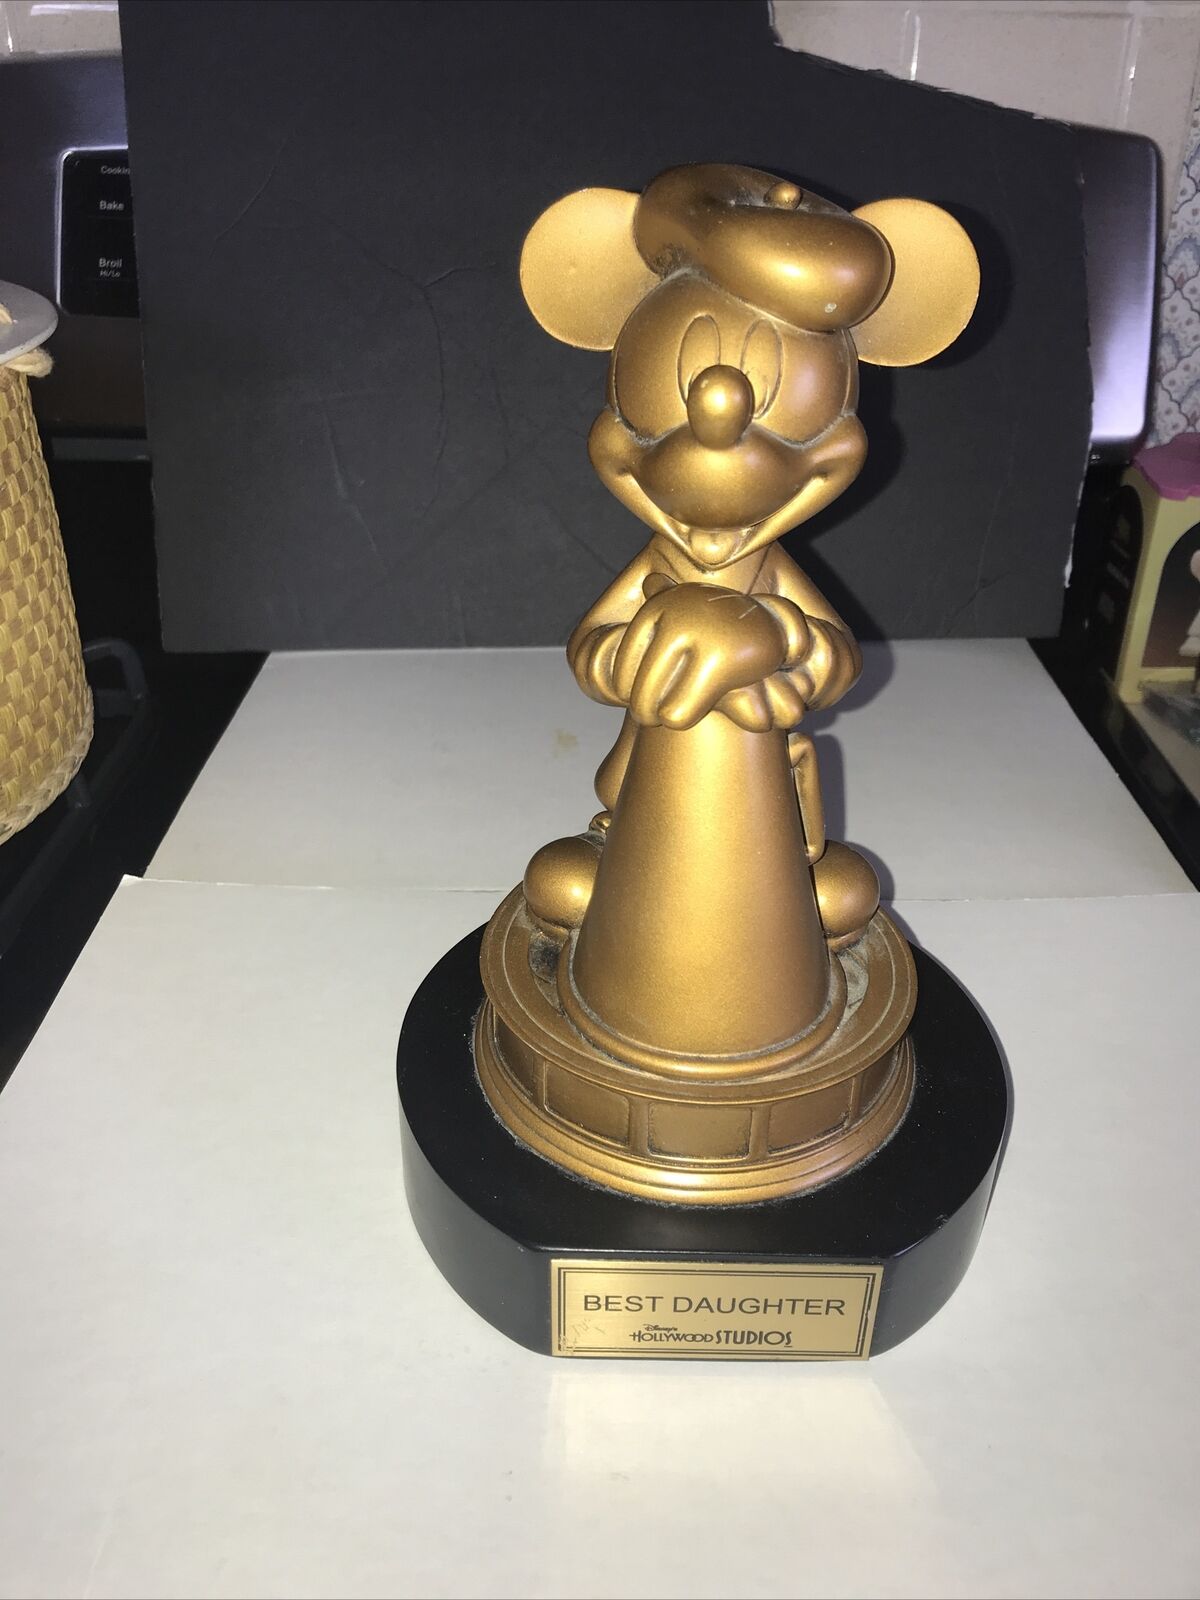 Disney Hollywood Studios Best Daughter Trophy Director Mickey Mouse Figurine